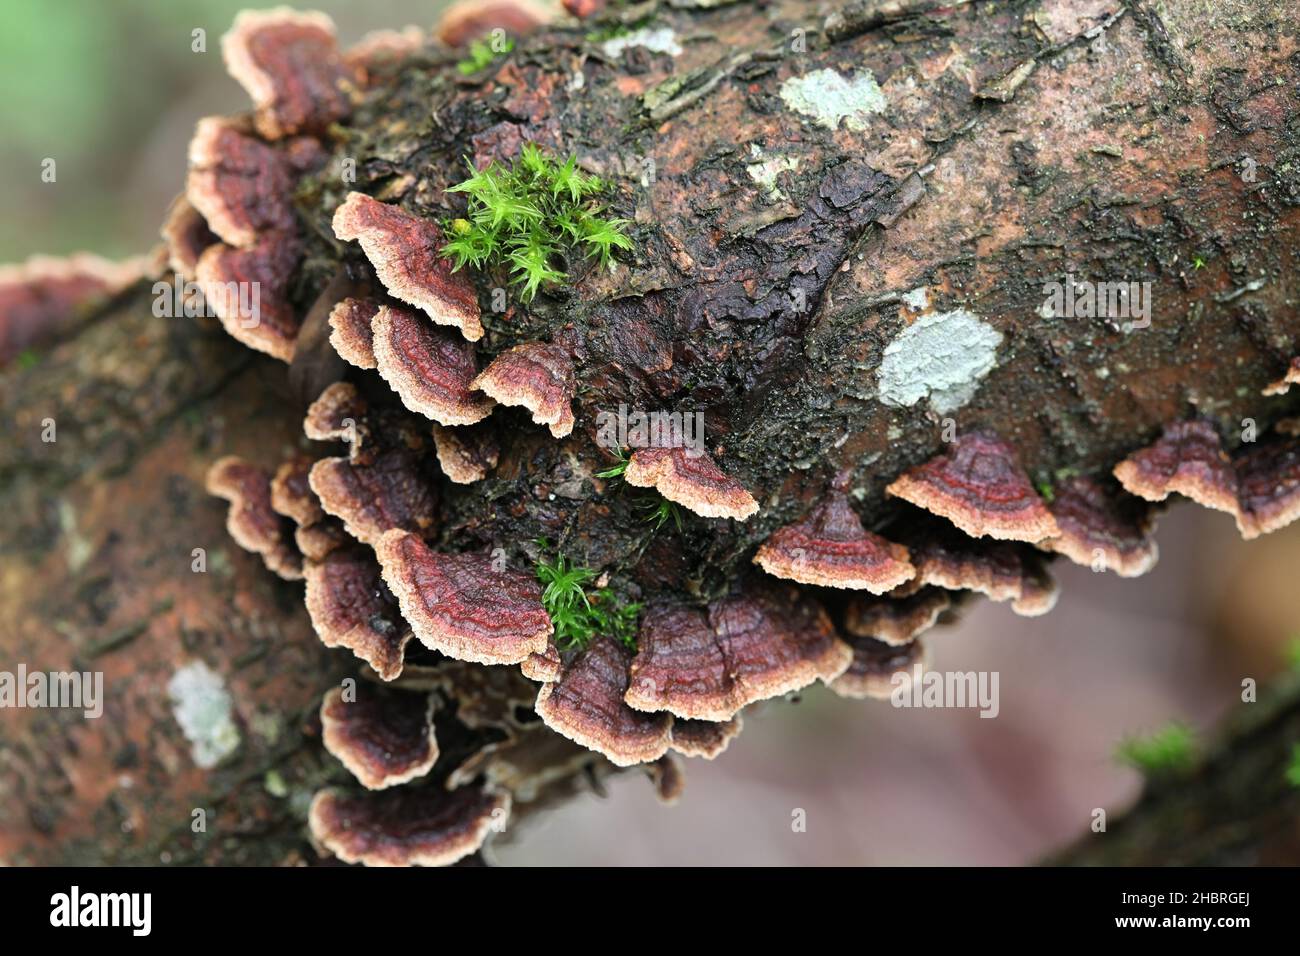 Hydnoporia tabacina, also called, Pseudochaete tabacina, known as willow glue, wild fungus from Finland Stock Photo